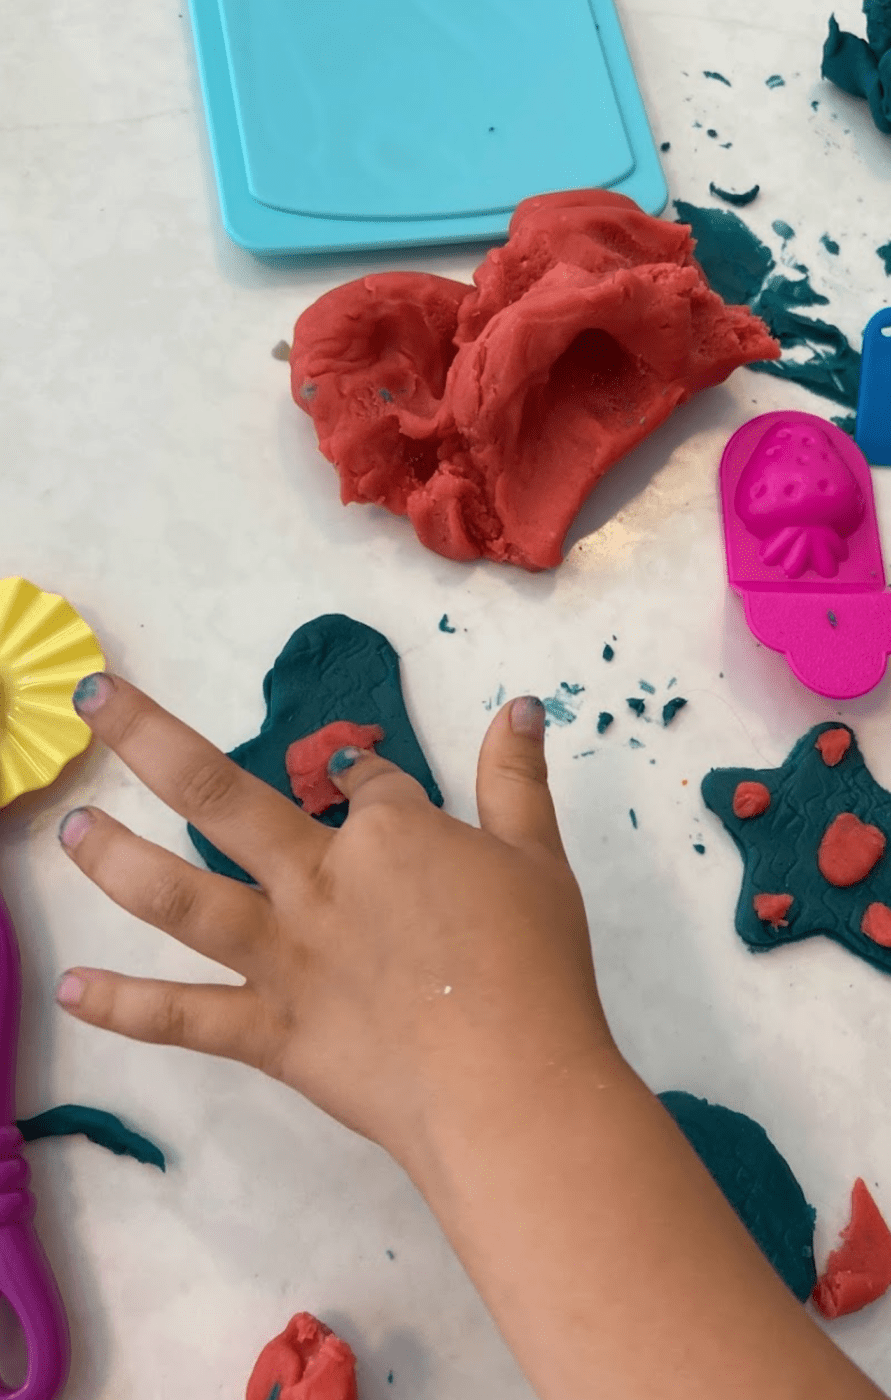 A child' hand squishing a shape into a homemade playdough cutout of a heart. Other playdough and tools for manipulating it surround the child's hand.